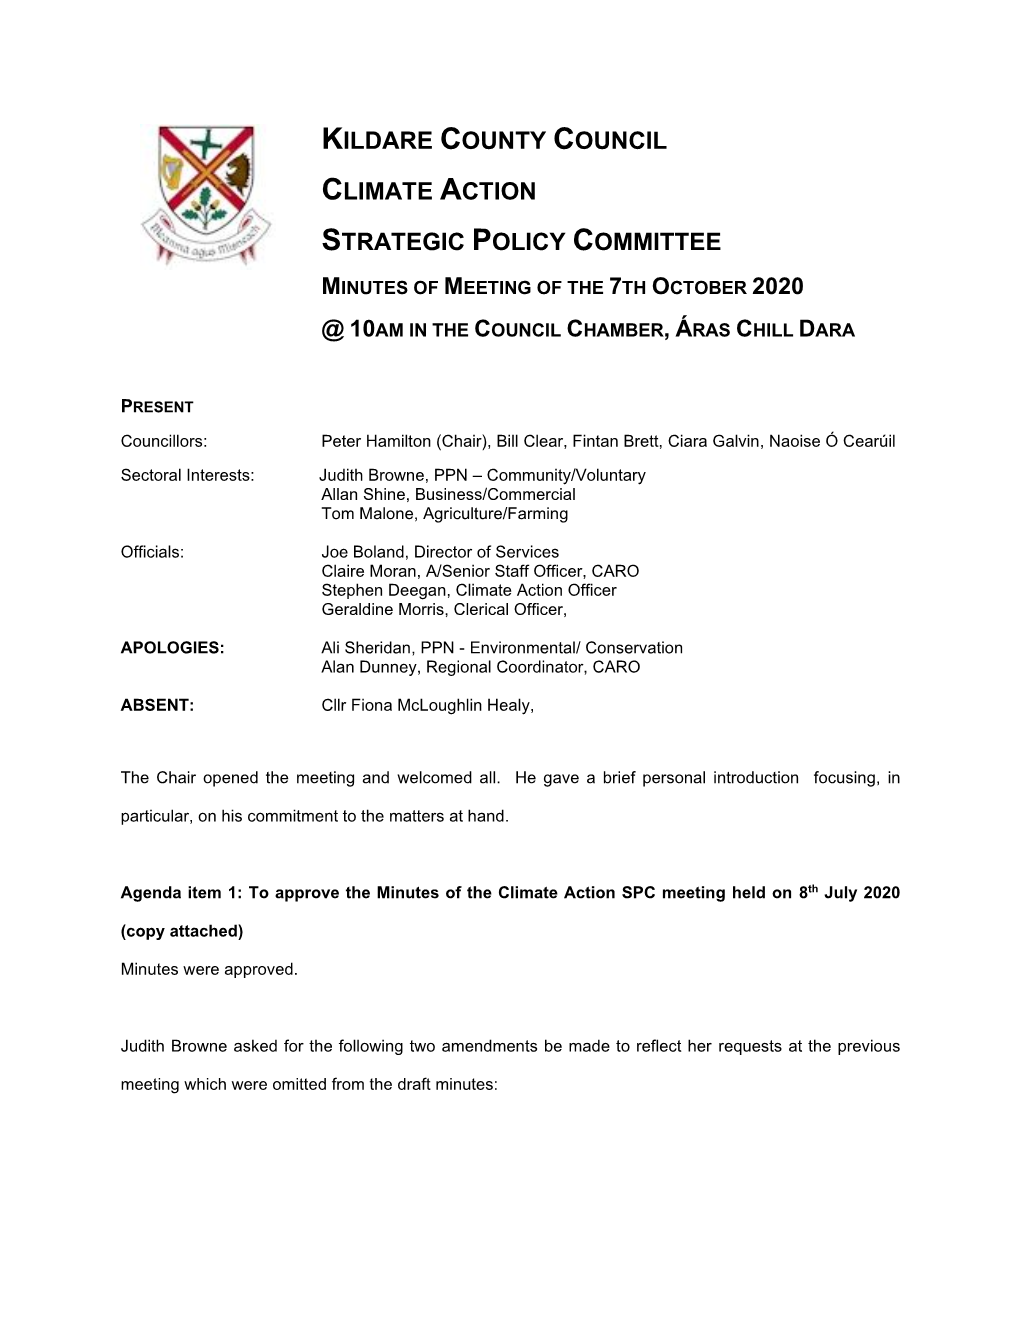 Kildare County Council Climate Action Strategic Policy Committee